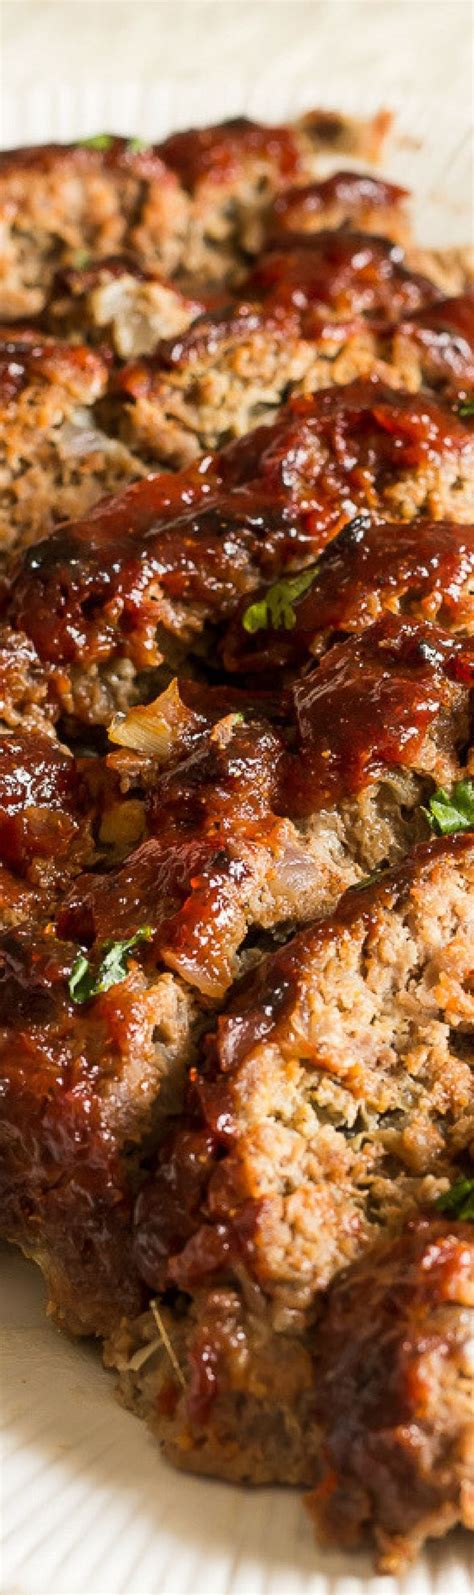 Especially in a sandwich the next day or with a fried egg on top. Best 2 Lb Meatloaf Recipes - Doing my best for Him: Vegetable and Turkey Meatloaf Recipe - It's ...